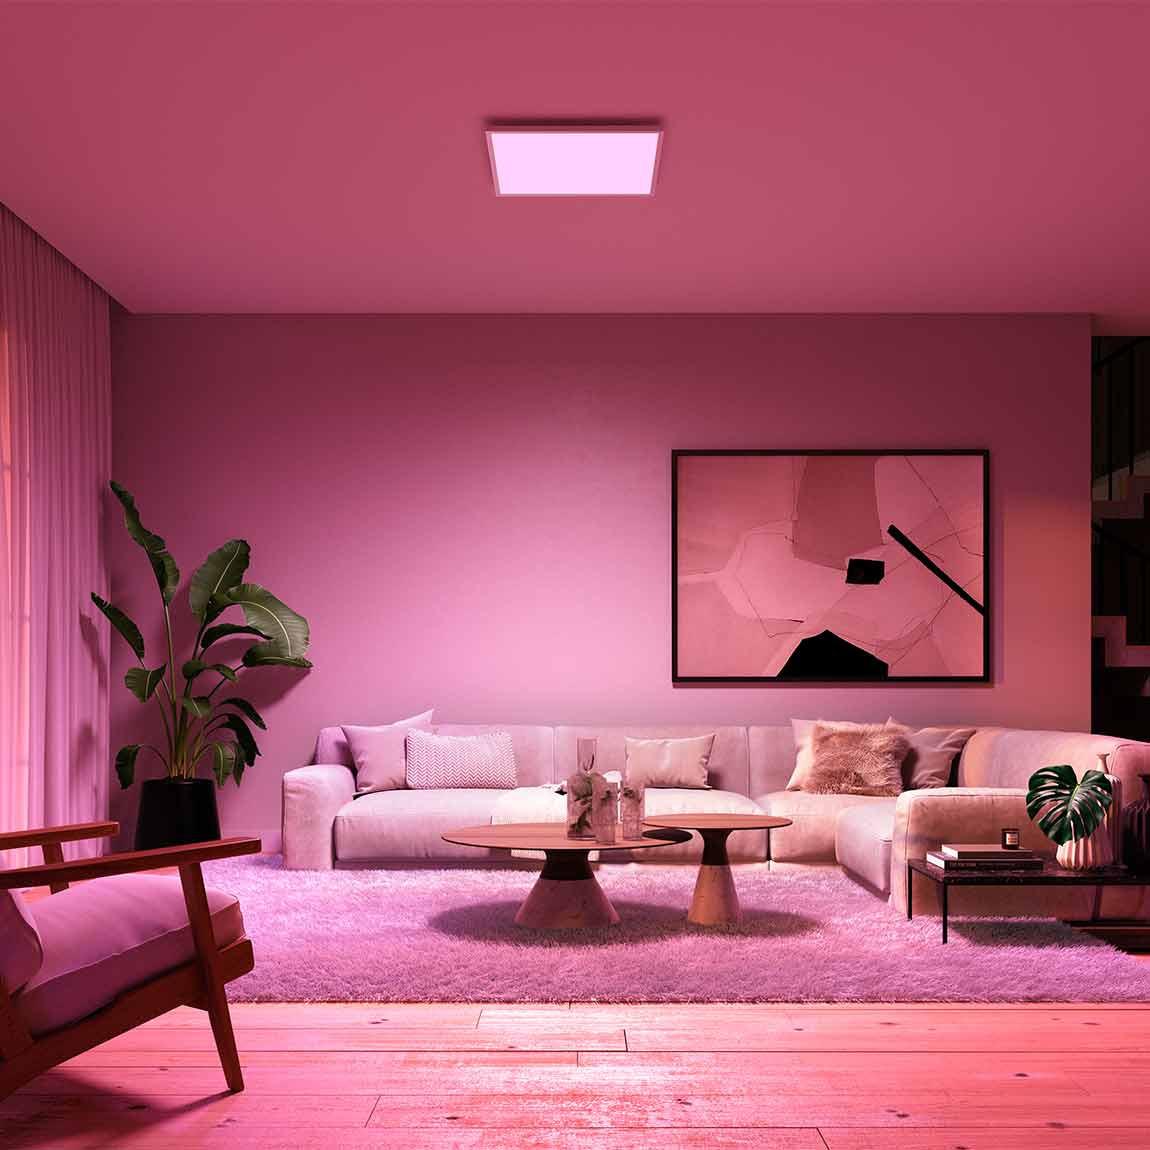 Philips Hue White & Color Ambiance Surimu Panel - 60x60cm - Lifestyle Wohnzimmer pink